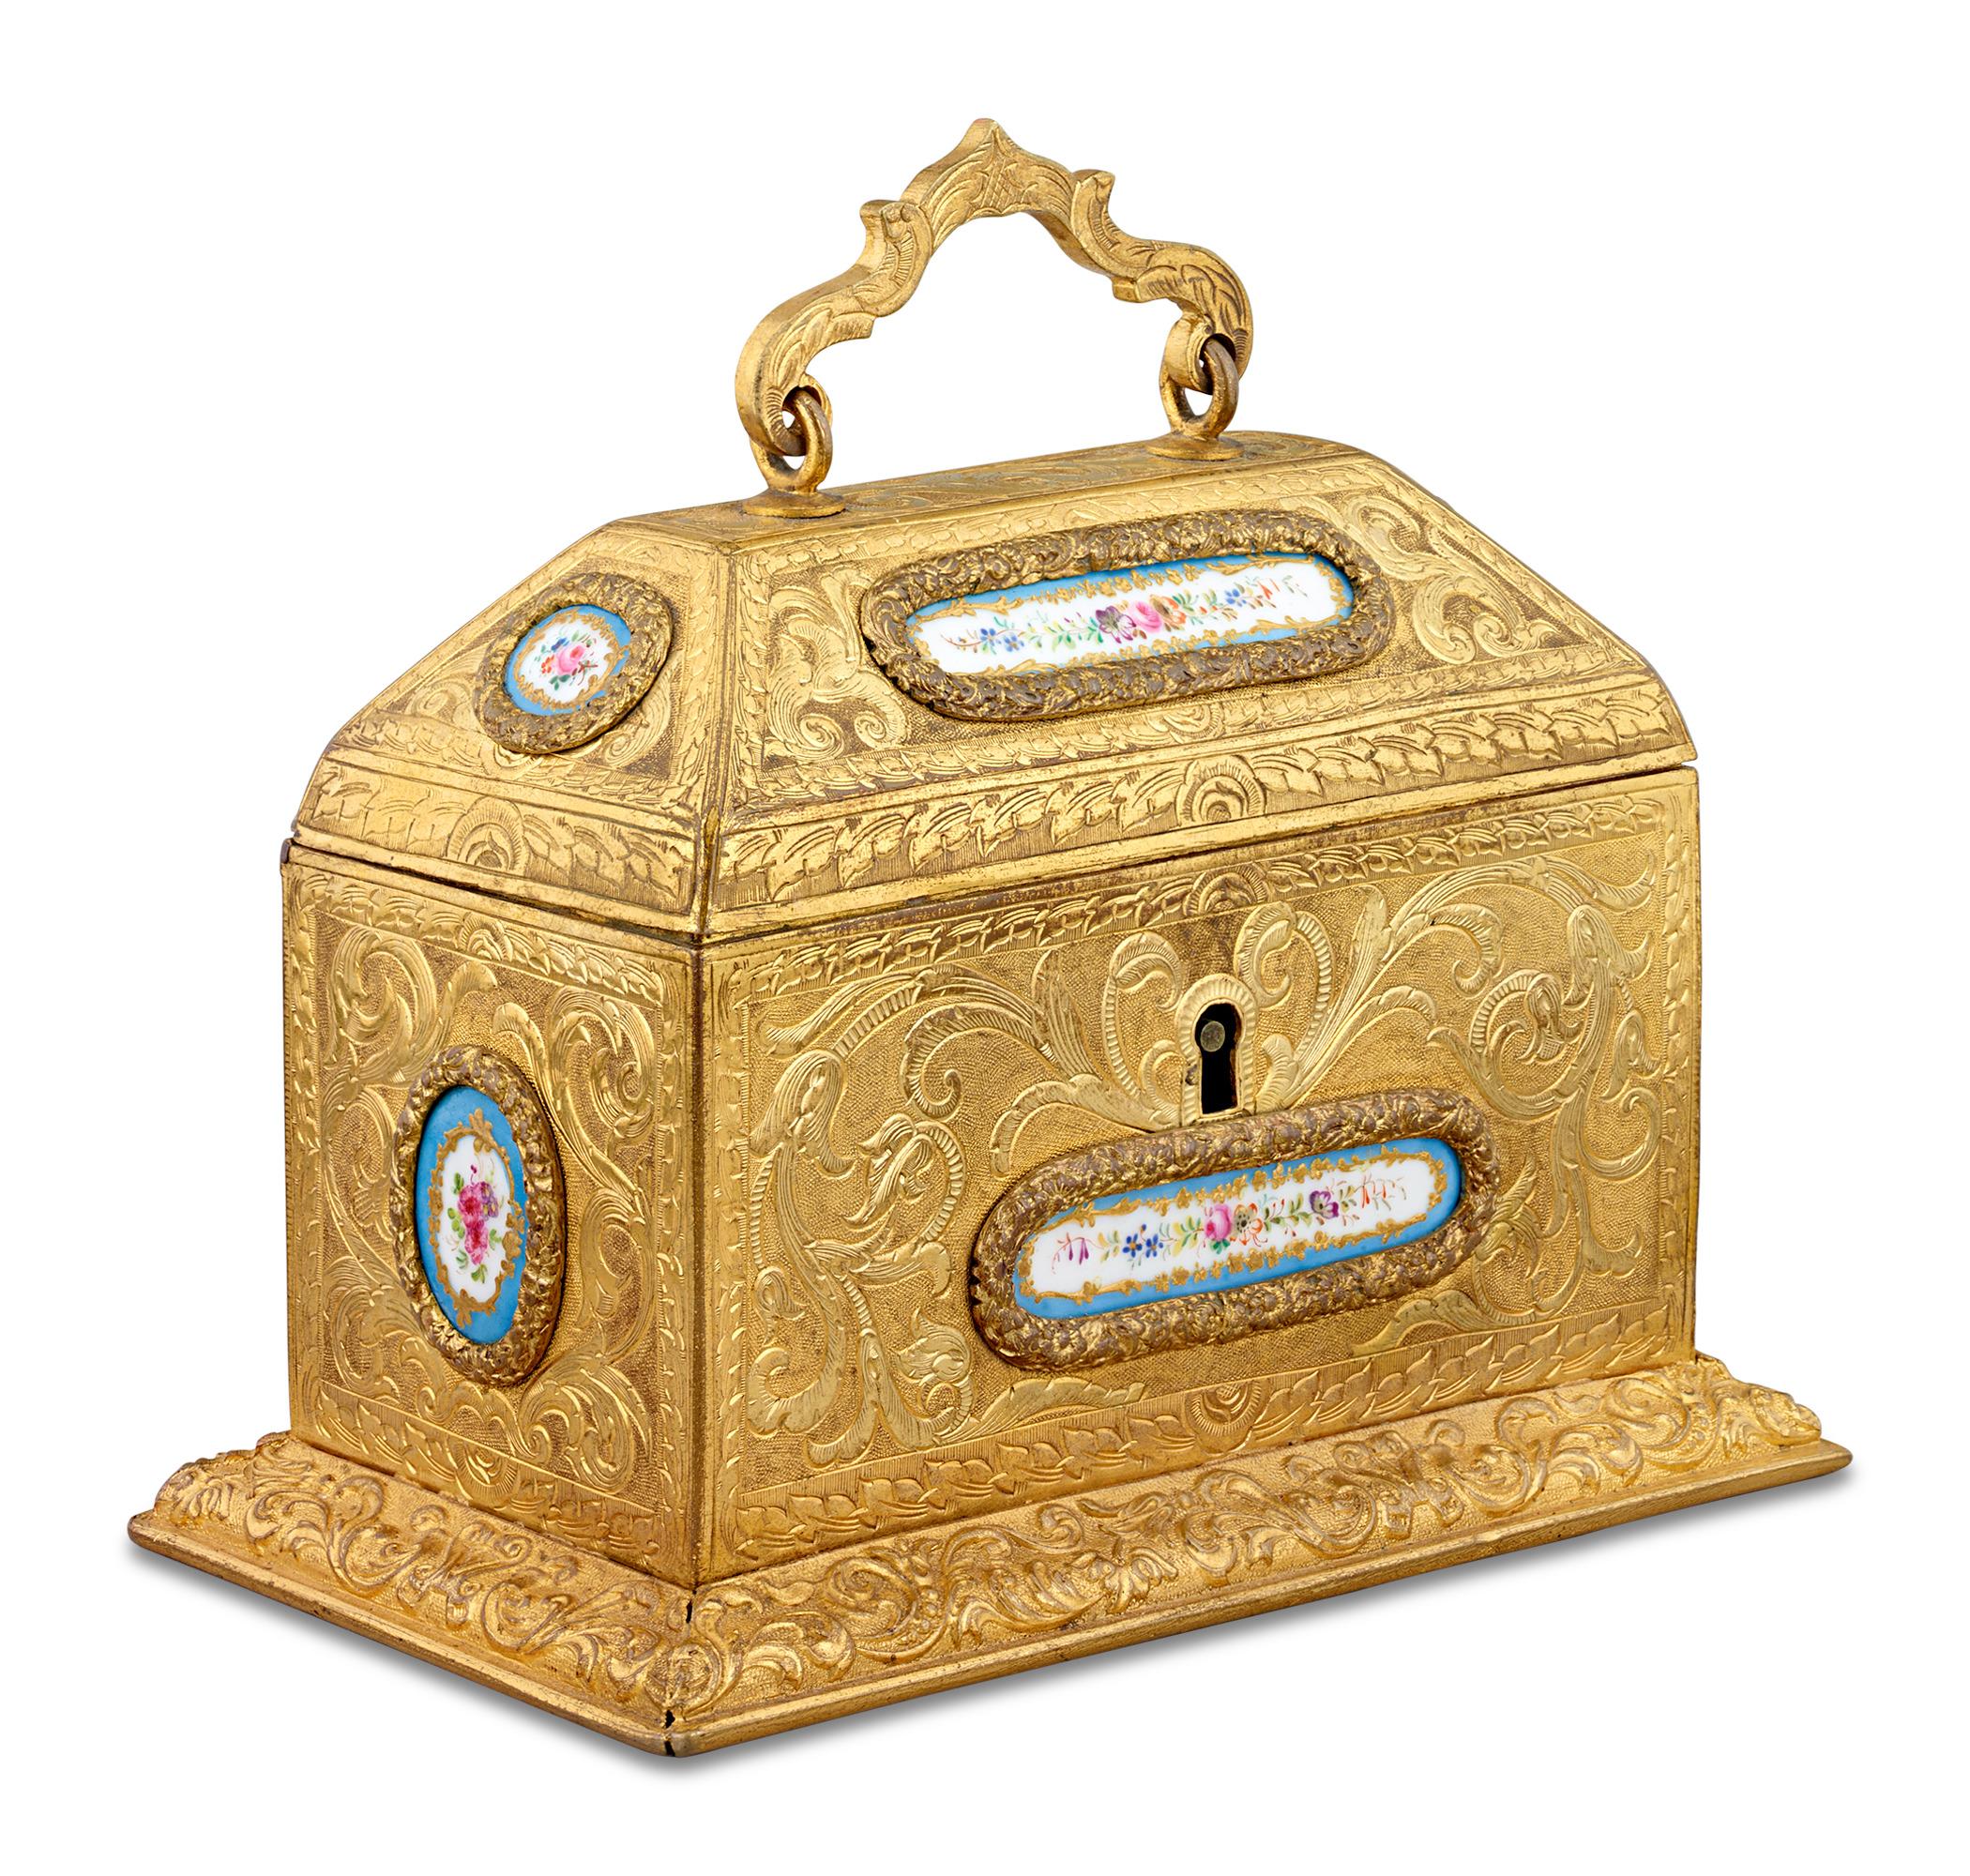 Seven resplendent Sèvres porcelain plaques surround this magnificent doré bronze box. The bright floral motif on the plaques perfectly matches the intricate chased, engraved and applied bronze. Demand for porcelain-mounted objet d’art was